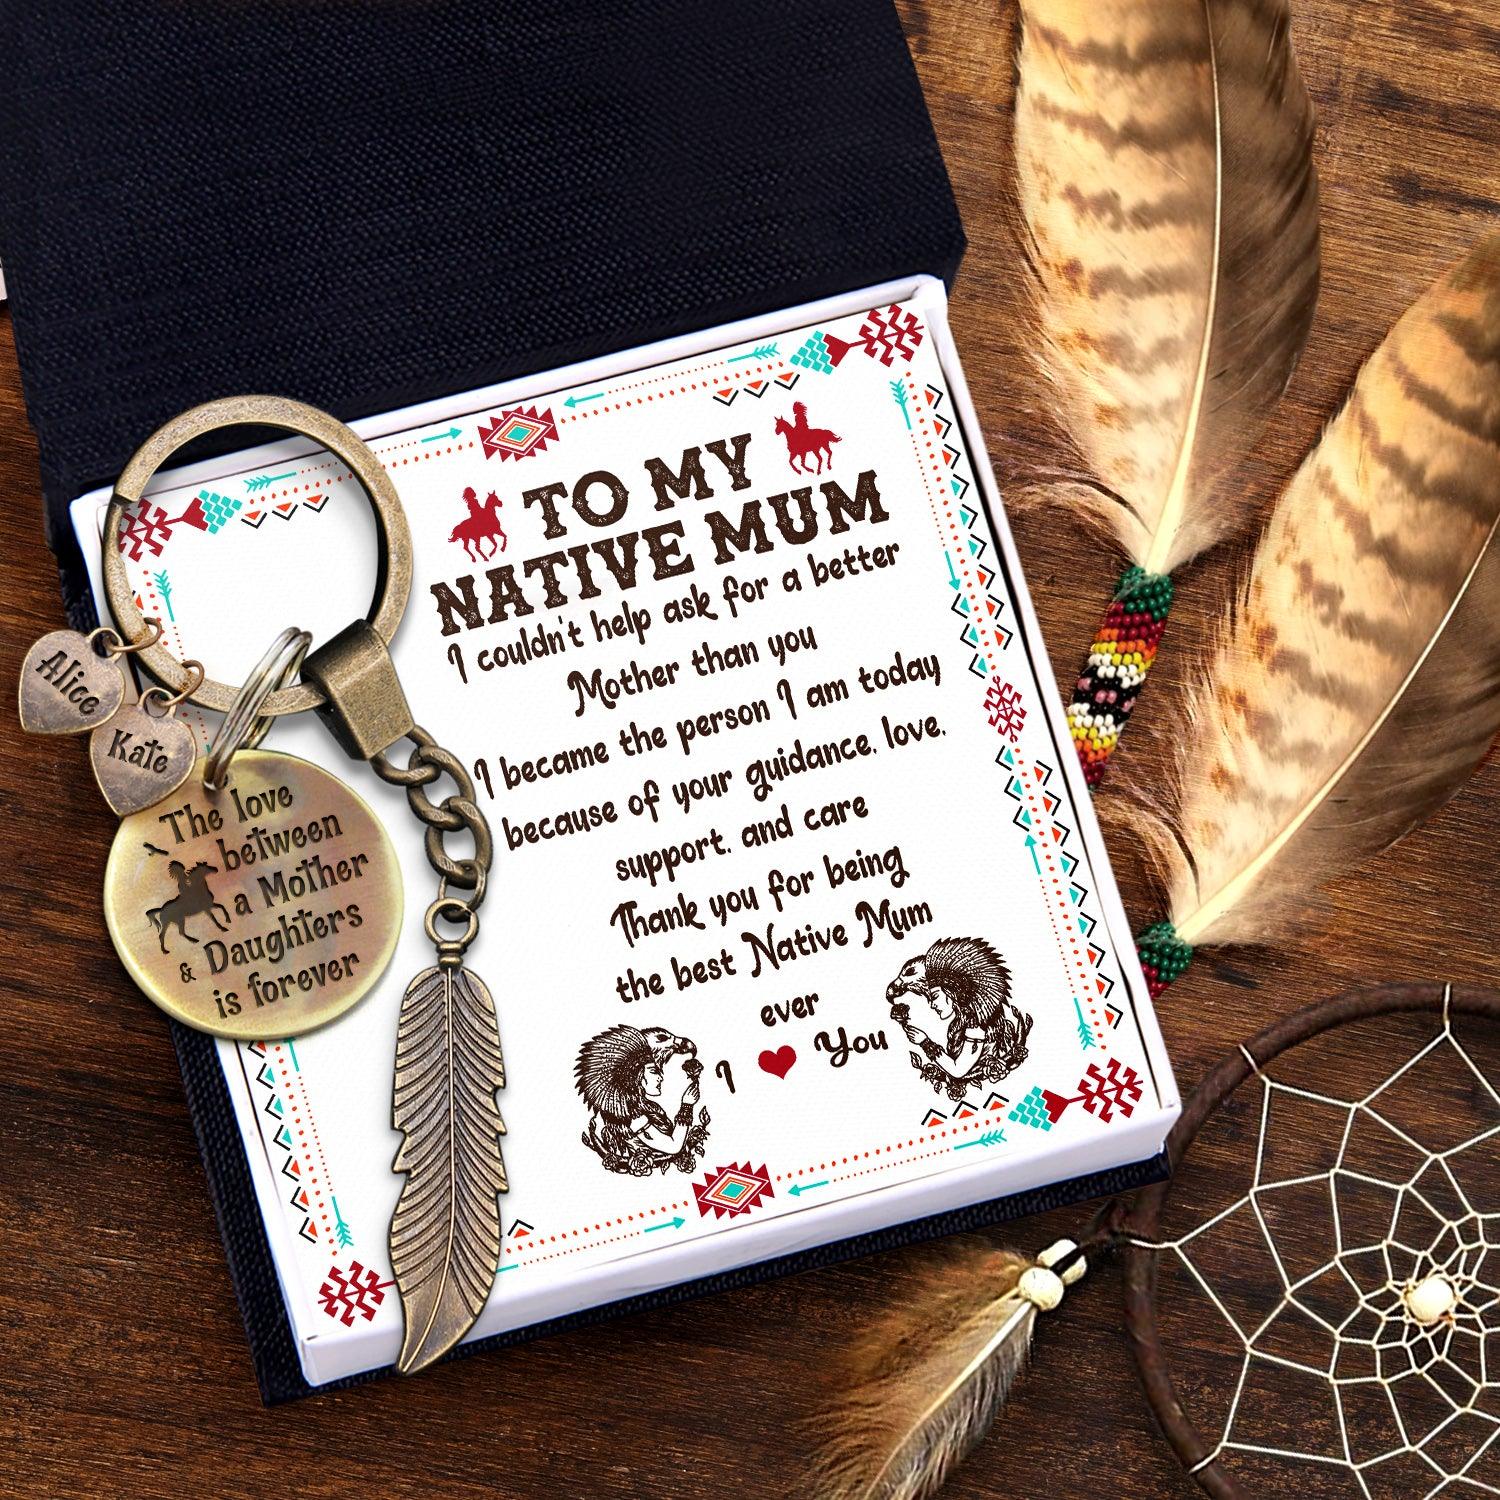 Personalised Feather Keychain - Native American - To My Native Mum - Thank You For Being The Best Native Mum Ever - Augkdz19003 - Gifts Holder